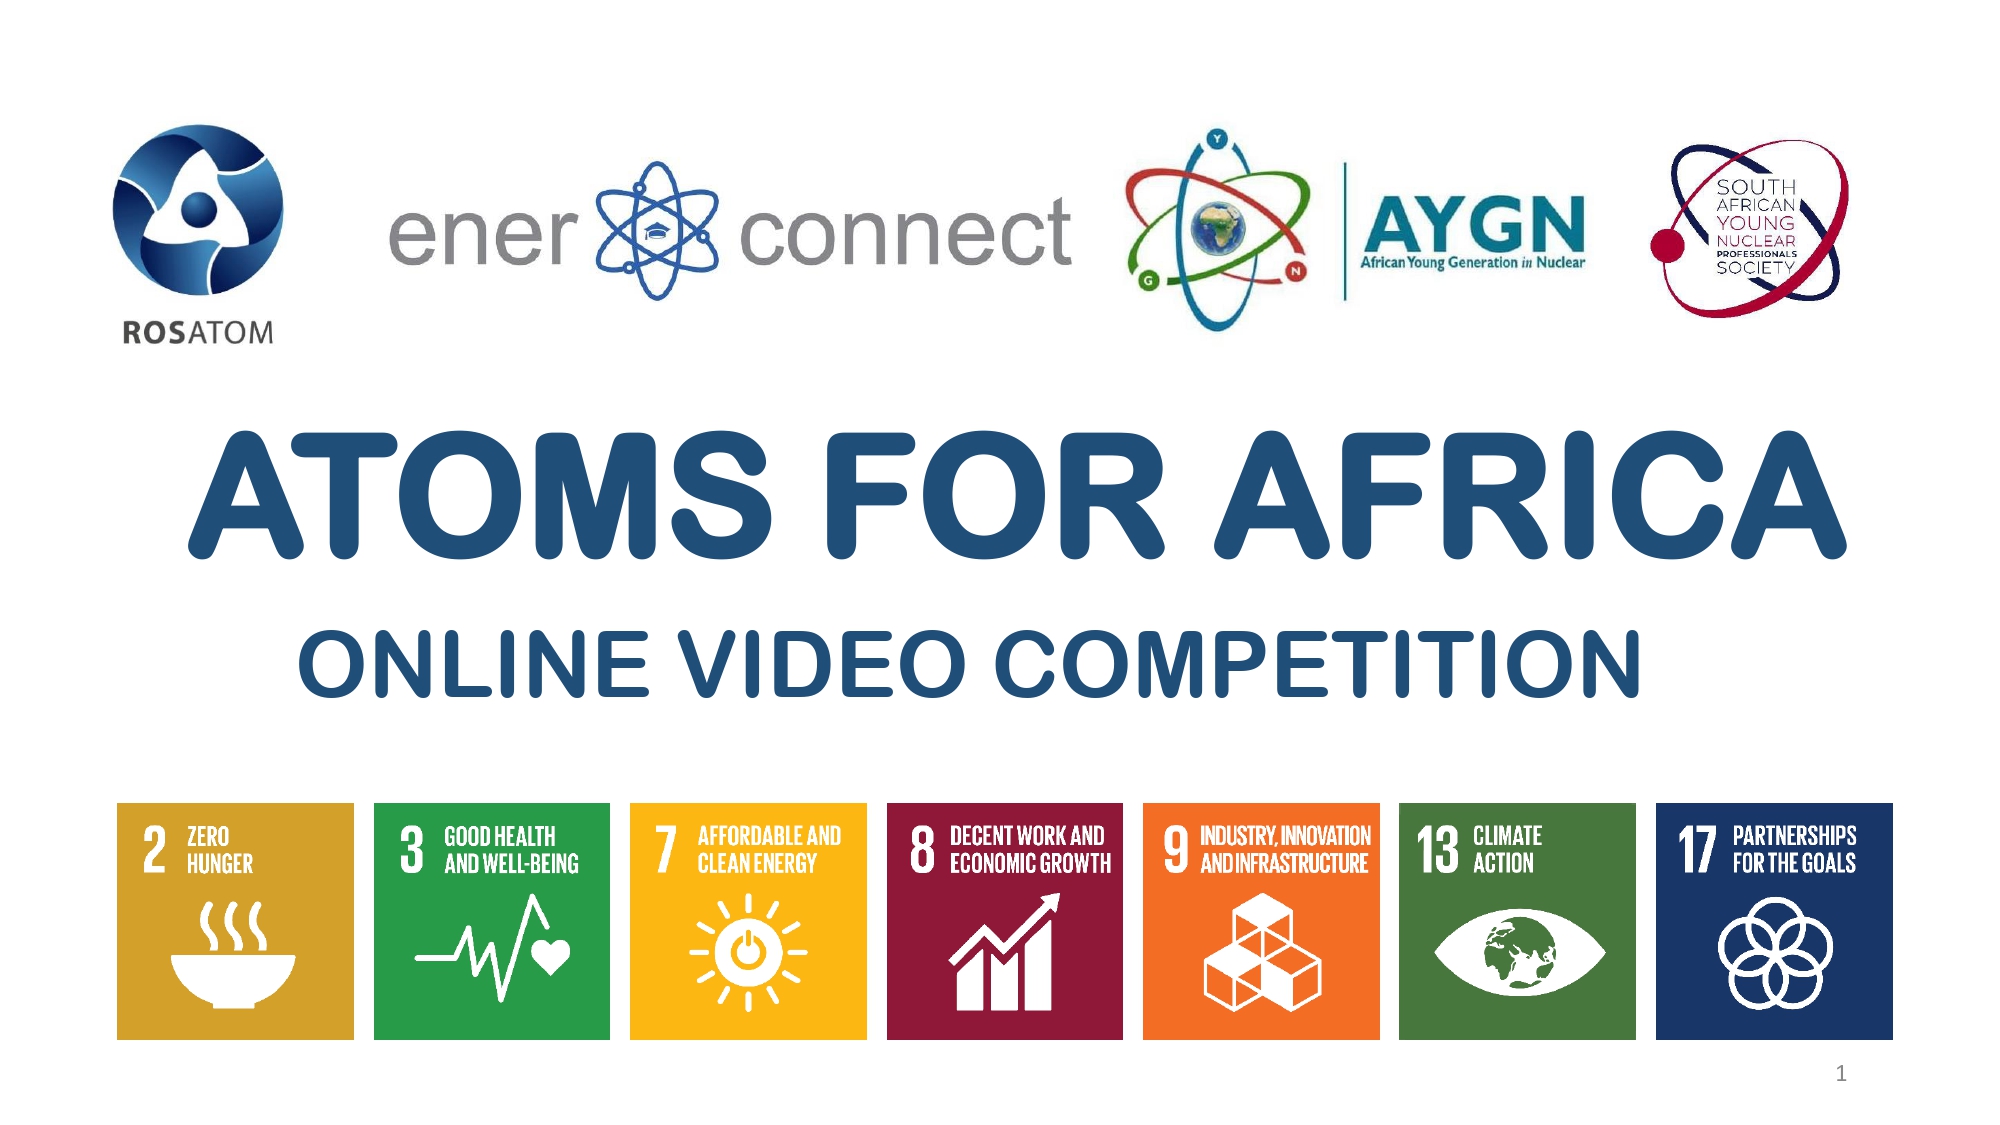 Teams from Nigeria, Tanzania and Kenya are awarded first prizes of “Atoms for Africa” Youth Video Competition